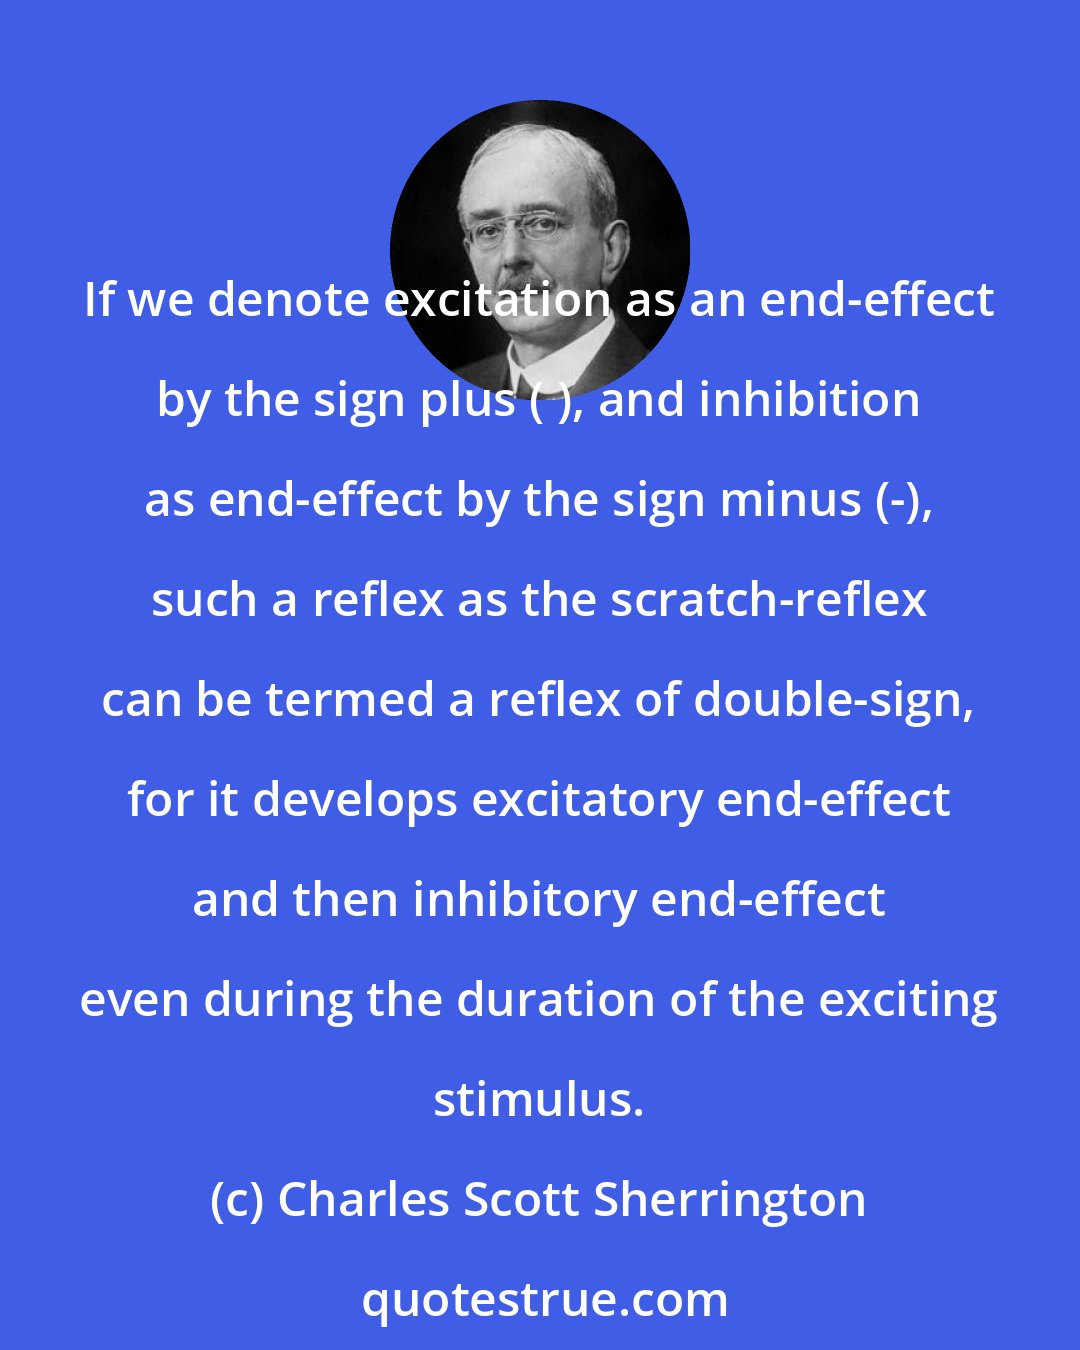 Charles Scott Sherrington: If we denote excitation as an end-effect by the sign plus (+), and inhibition as end-effect by the sign minus (-), such a reflex as the scratch-reflex can be termed a reflex of double-sign, for it develops excitatory end-effect and then inhibitory end-effect even during the duration of the exciting stimulus.